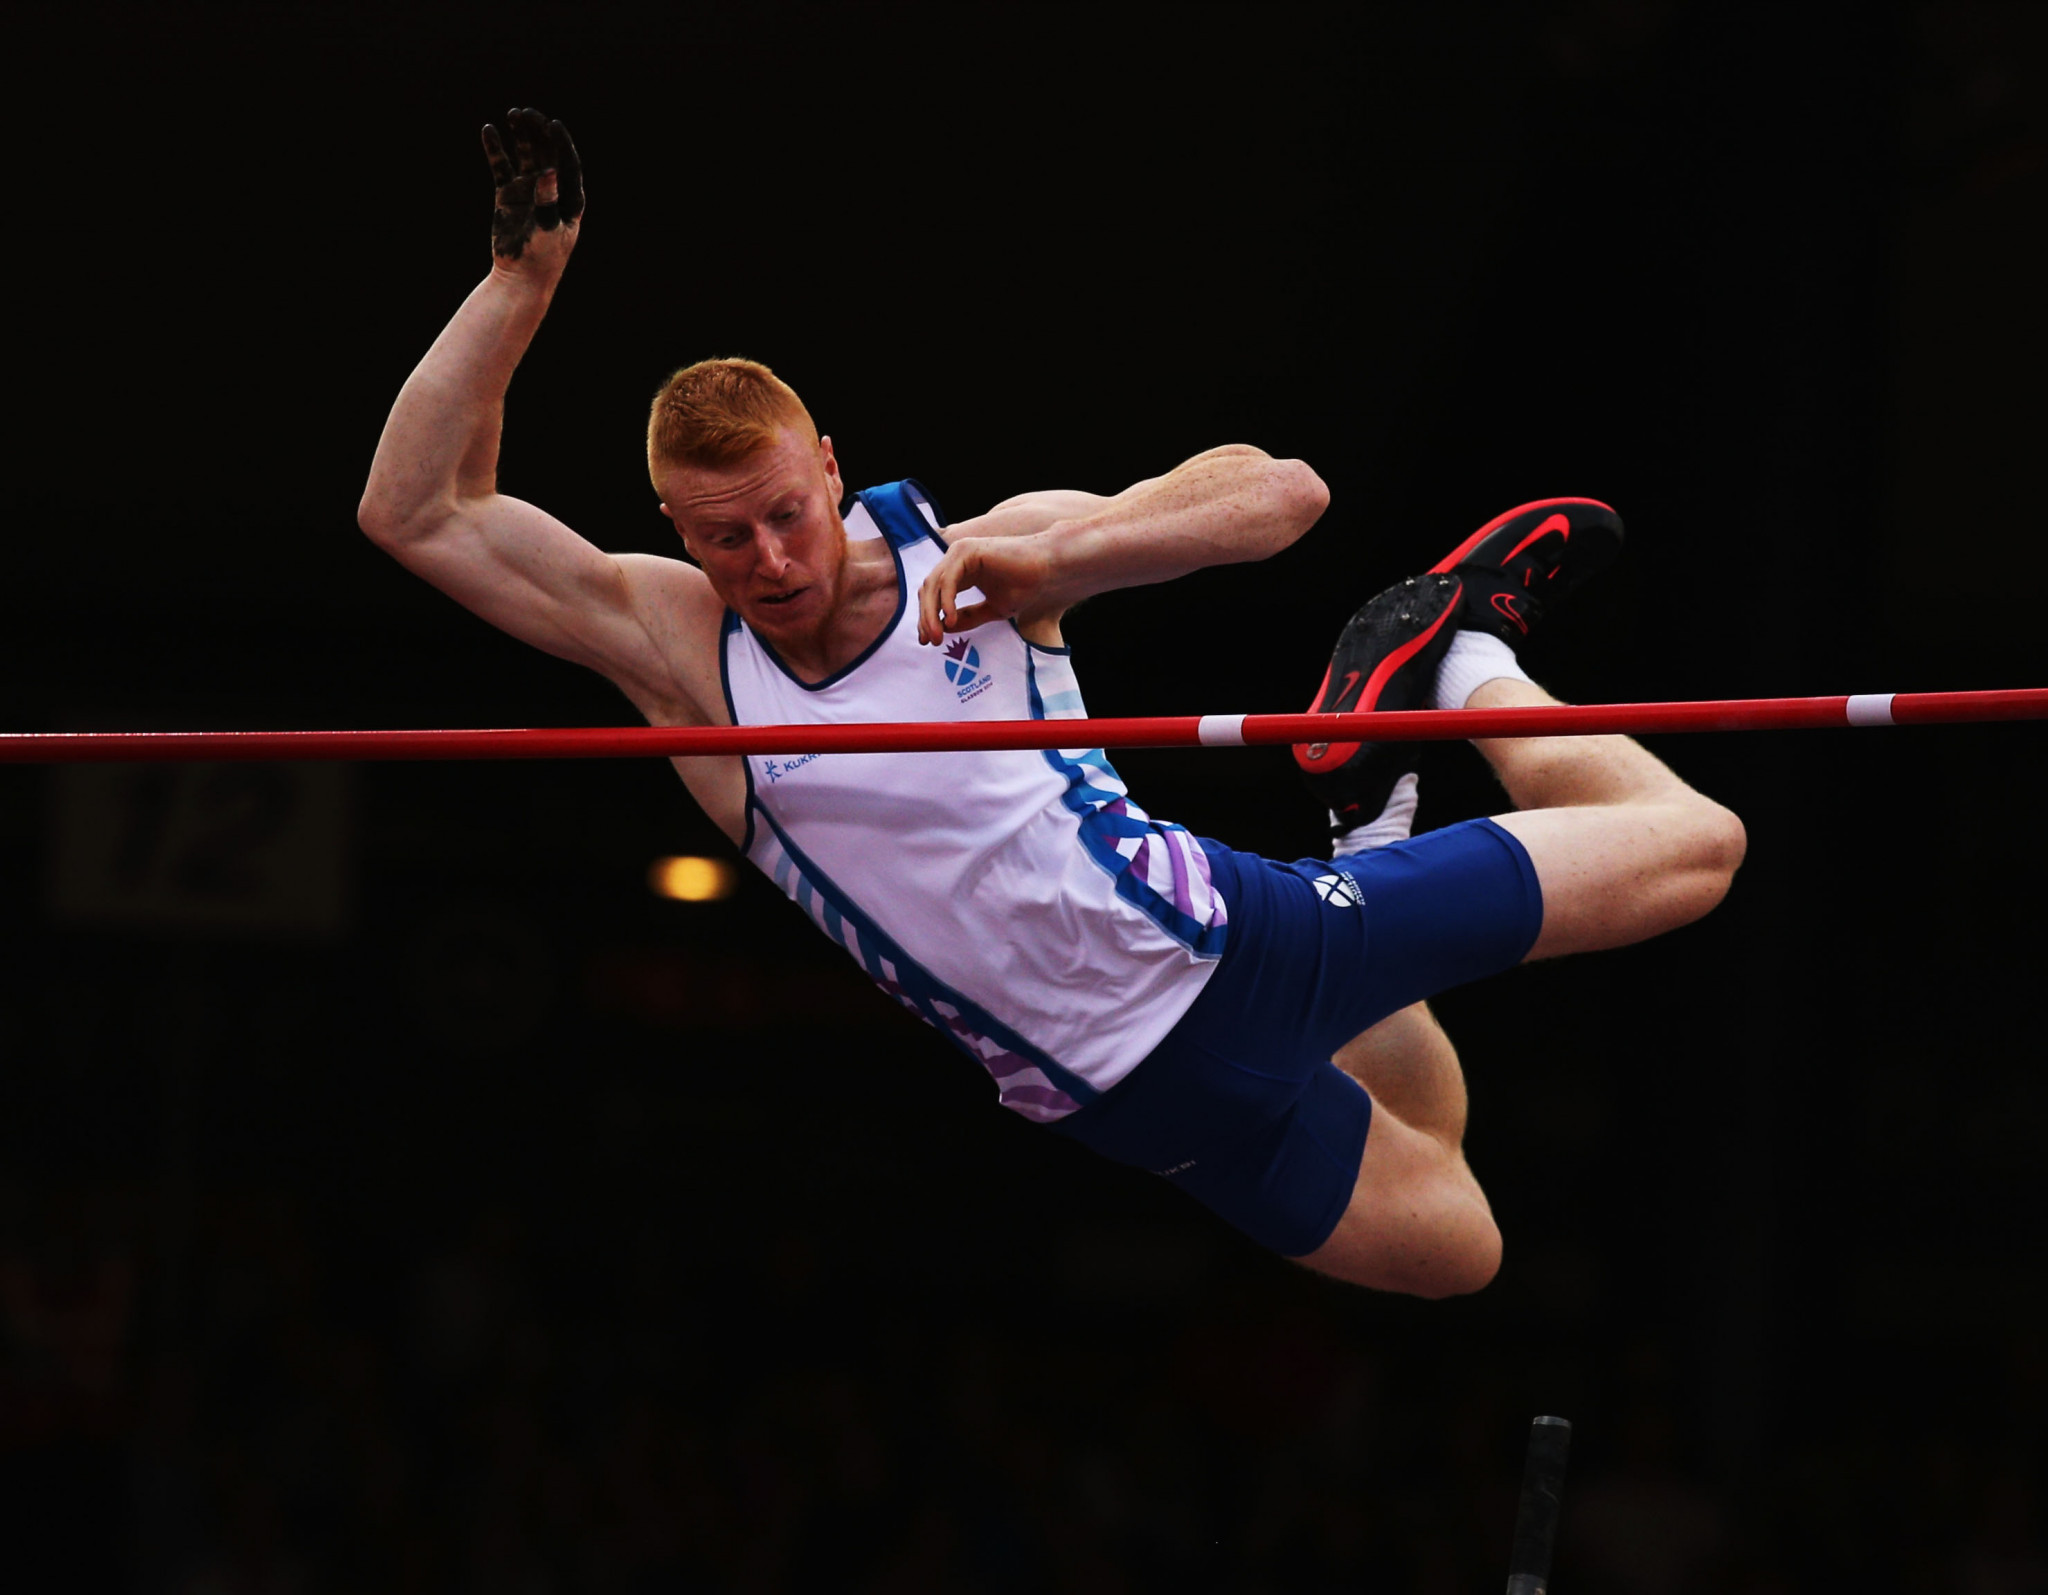 Jax Thoirs competed for the home nation at Glasgow 2014 ©Getty Images